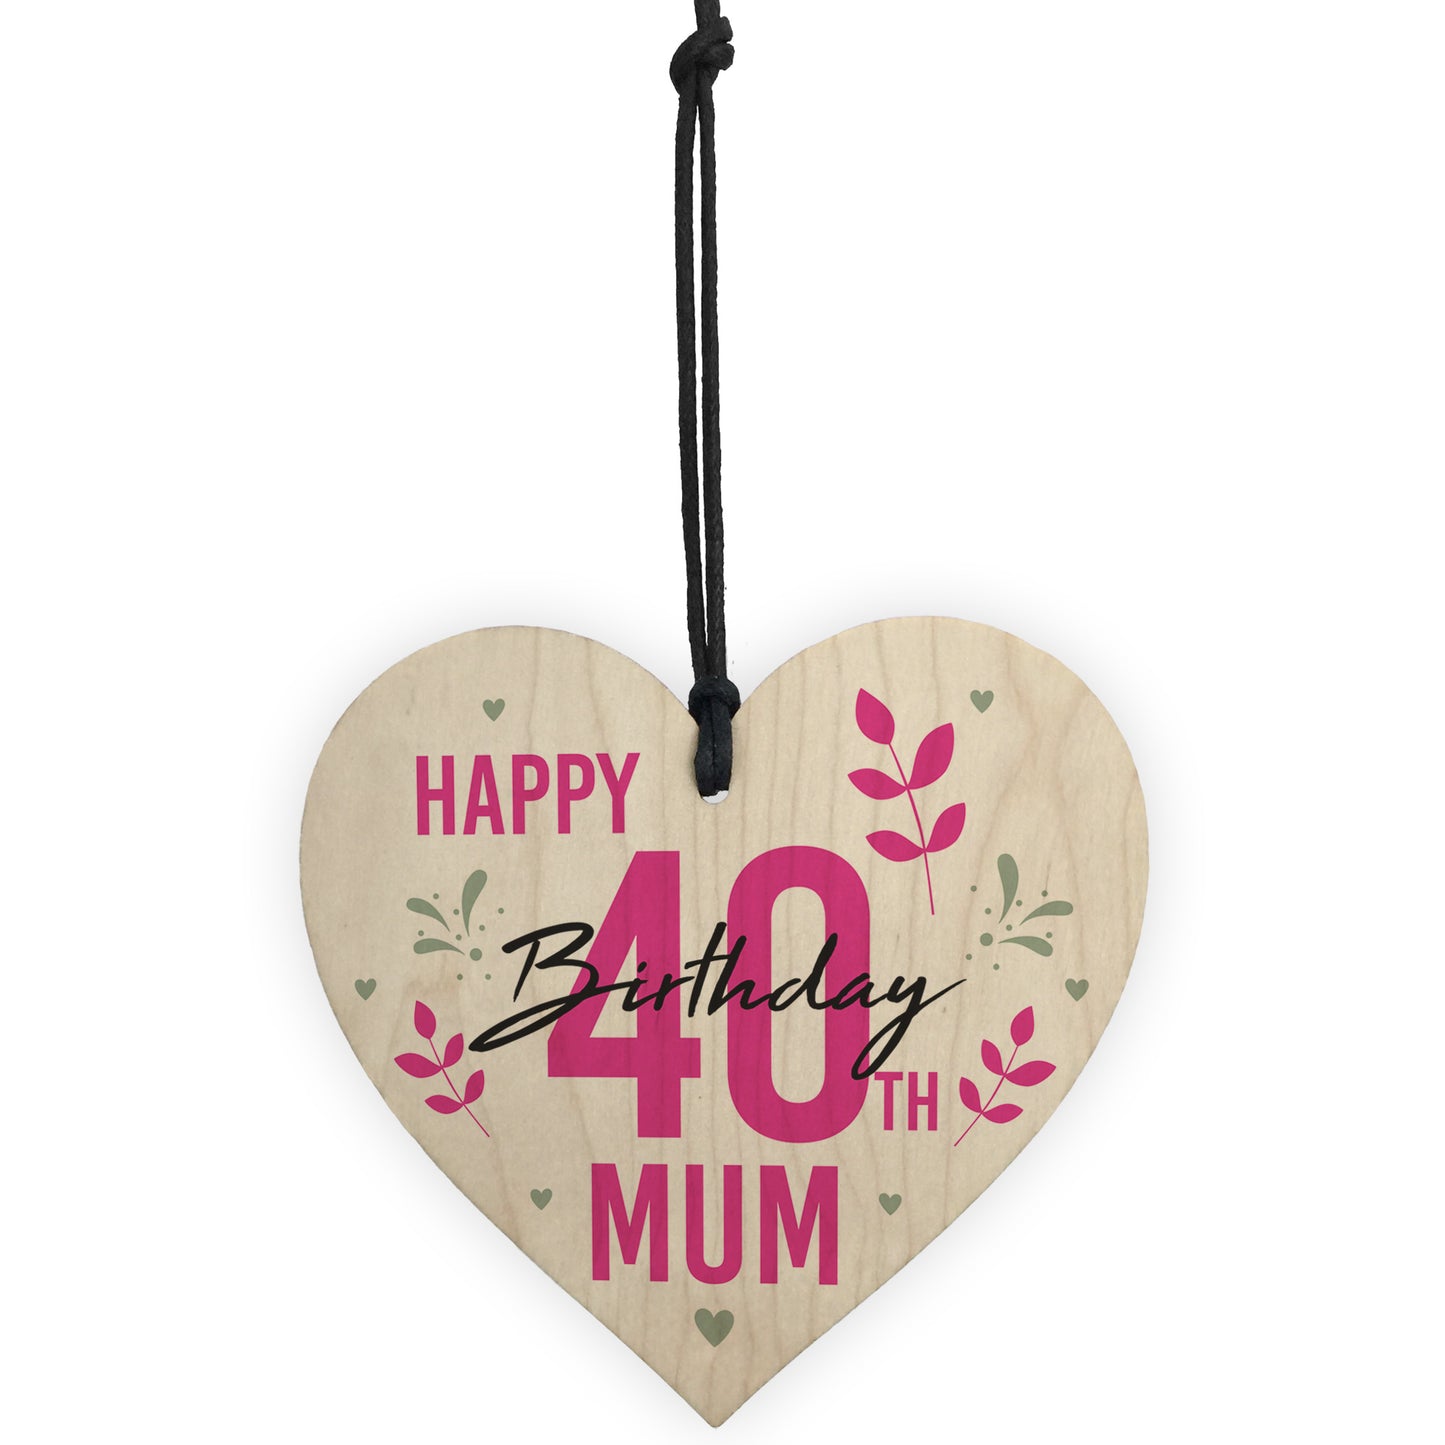 30th 40th 50th Birthday Gift For Mum Personalised Engraved Heart